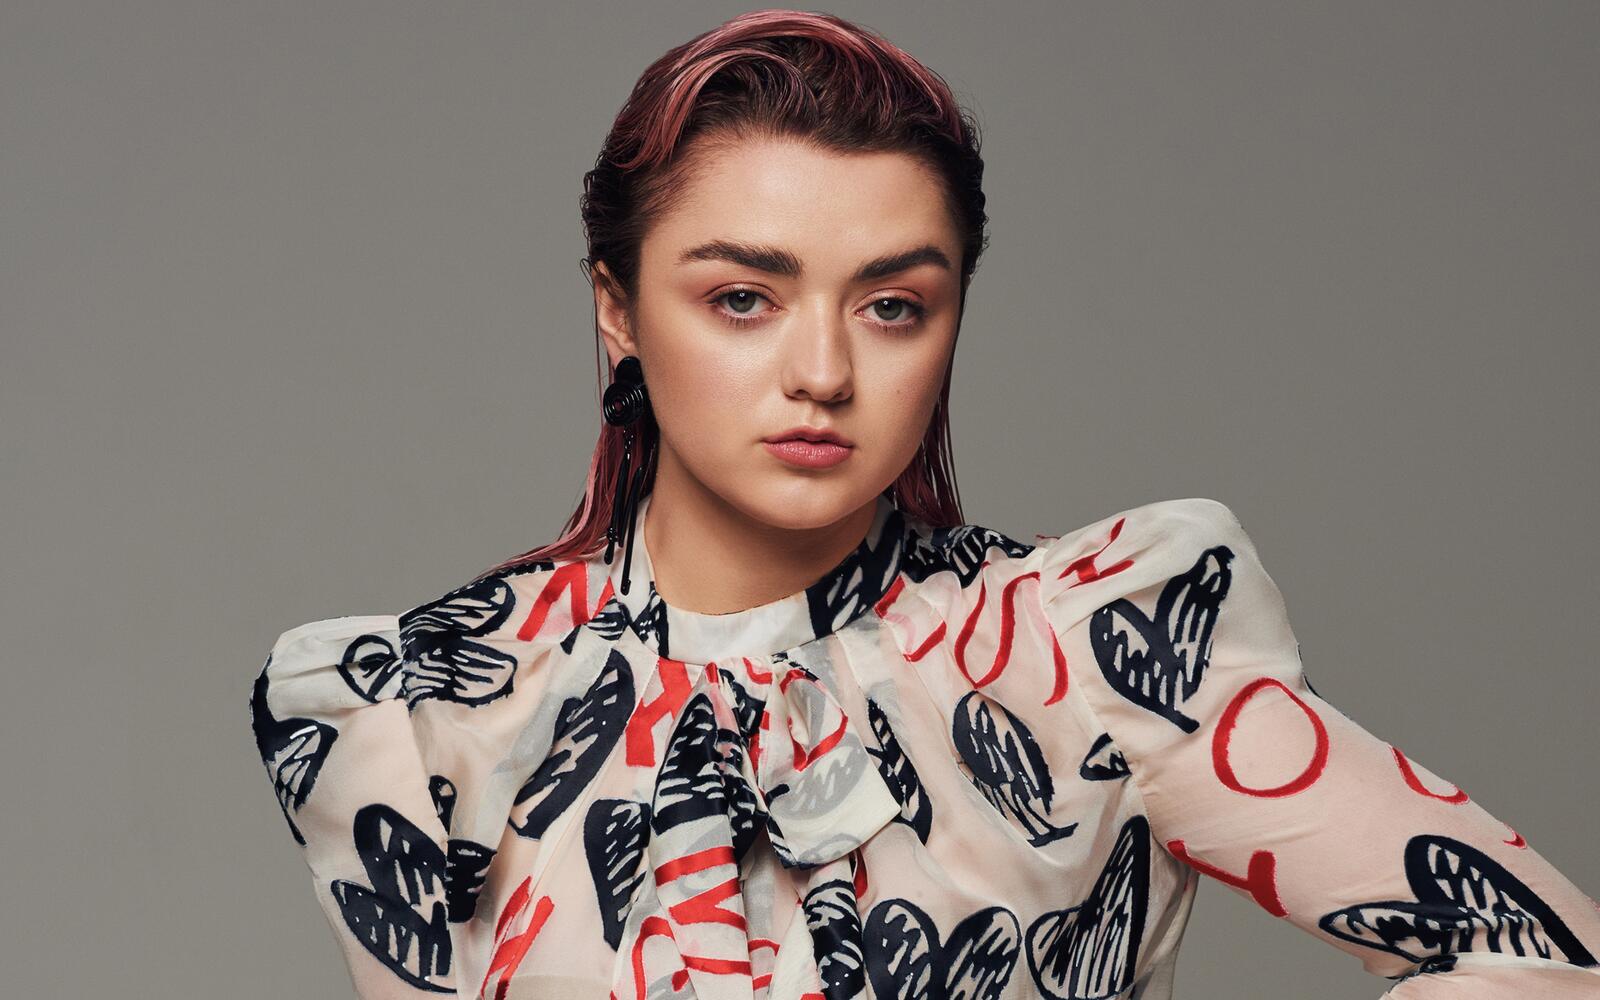 Wallpapers maisie williams gray background celebrities on the desktop